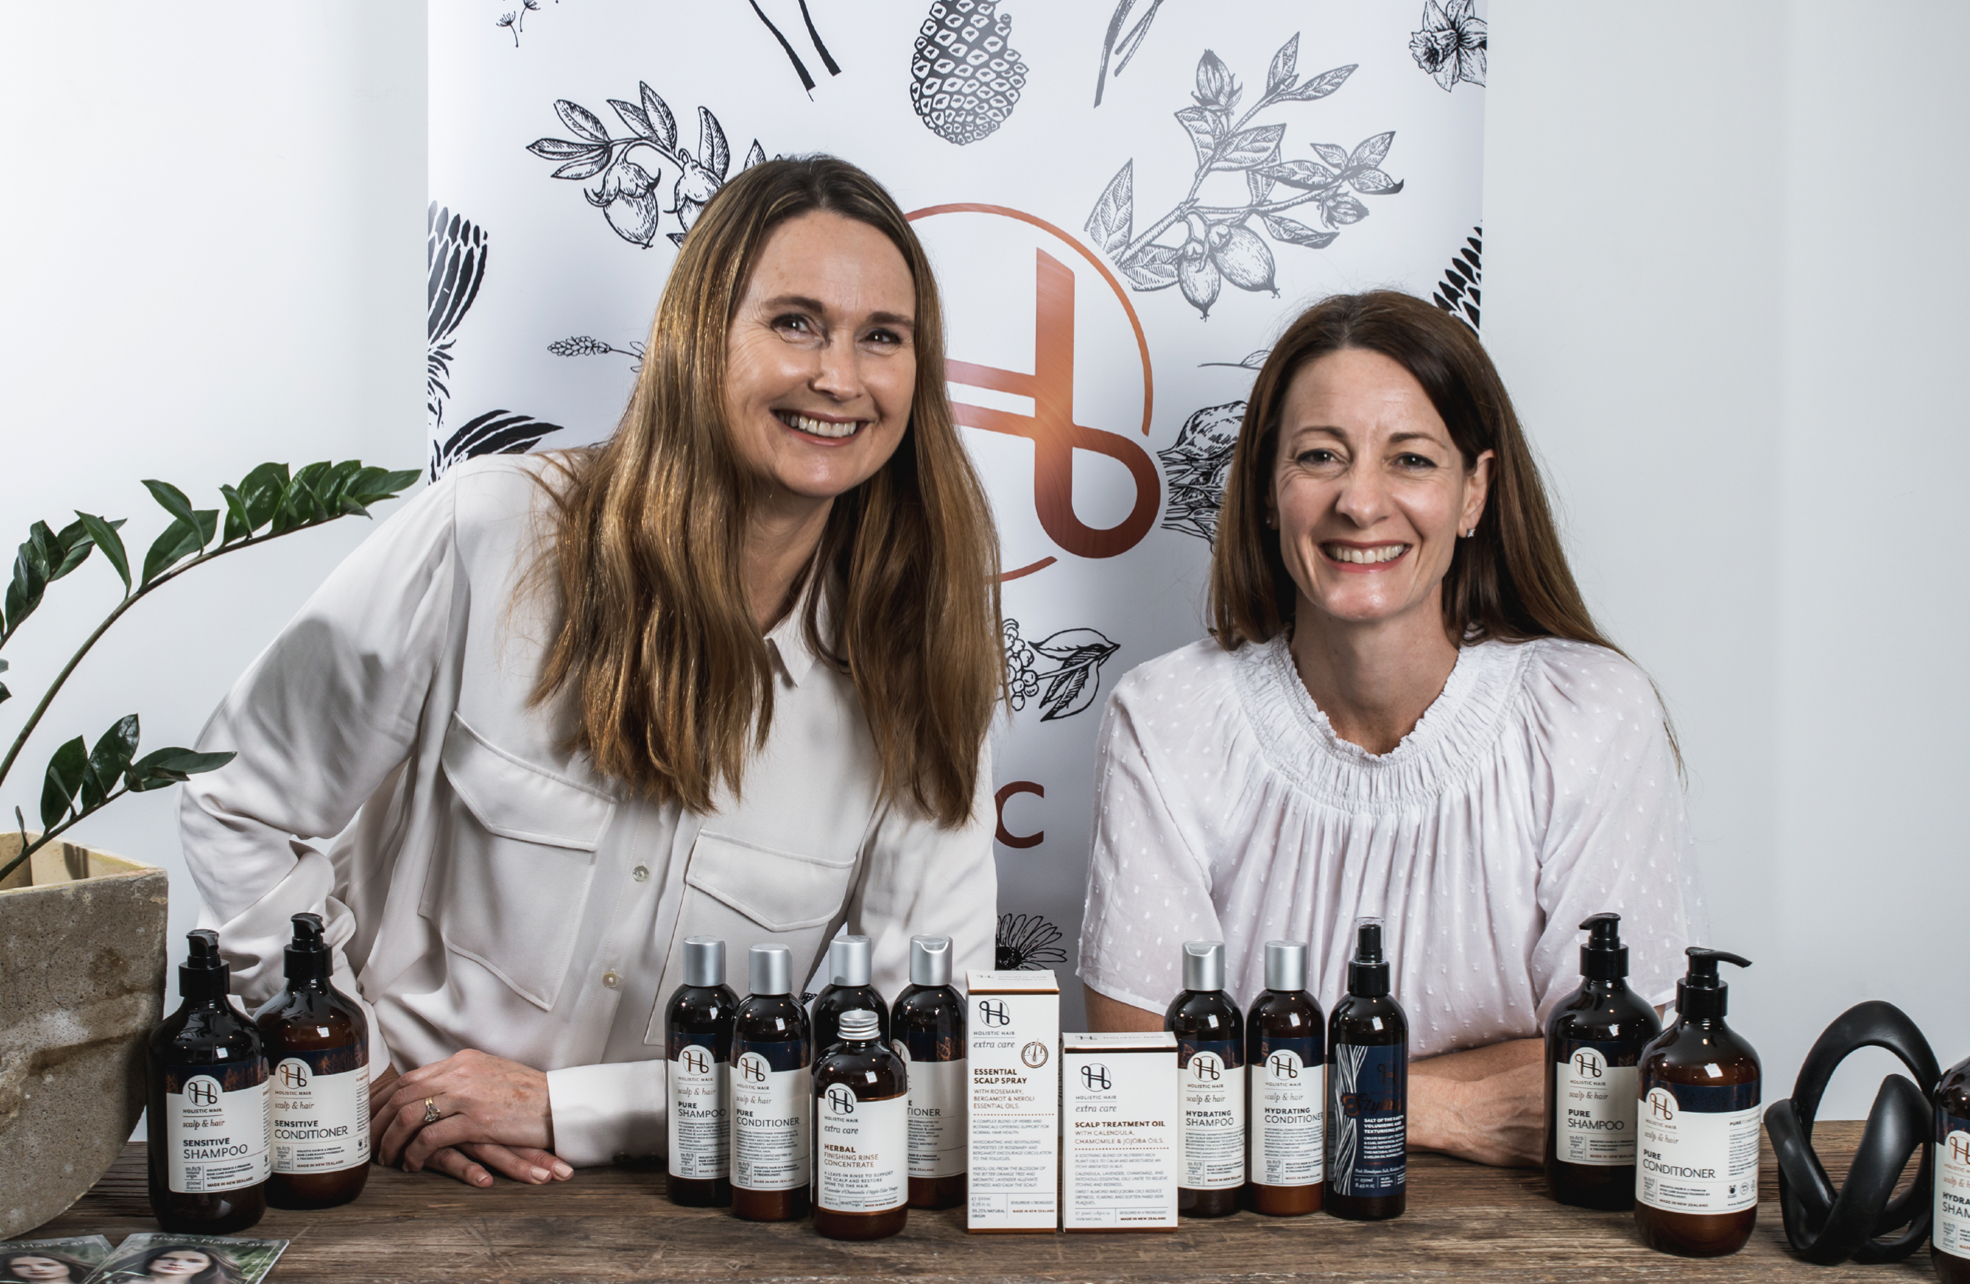 Case study: Holistic Hair Rethinks Plastic in the Beauty Industry